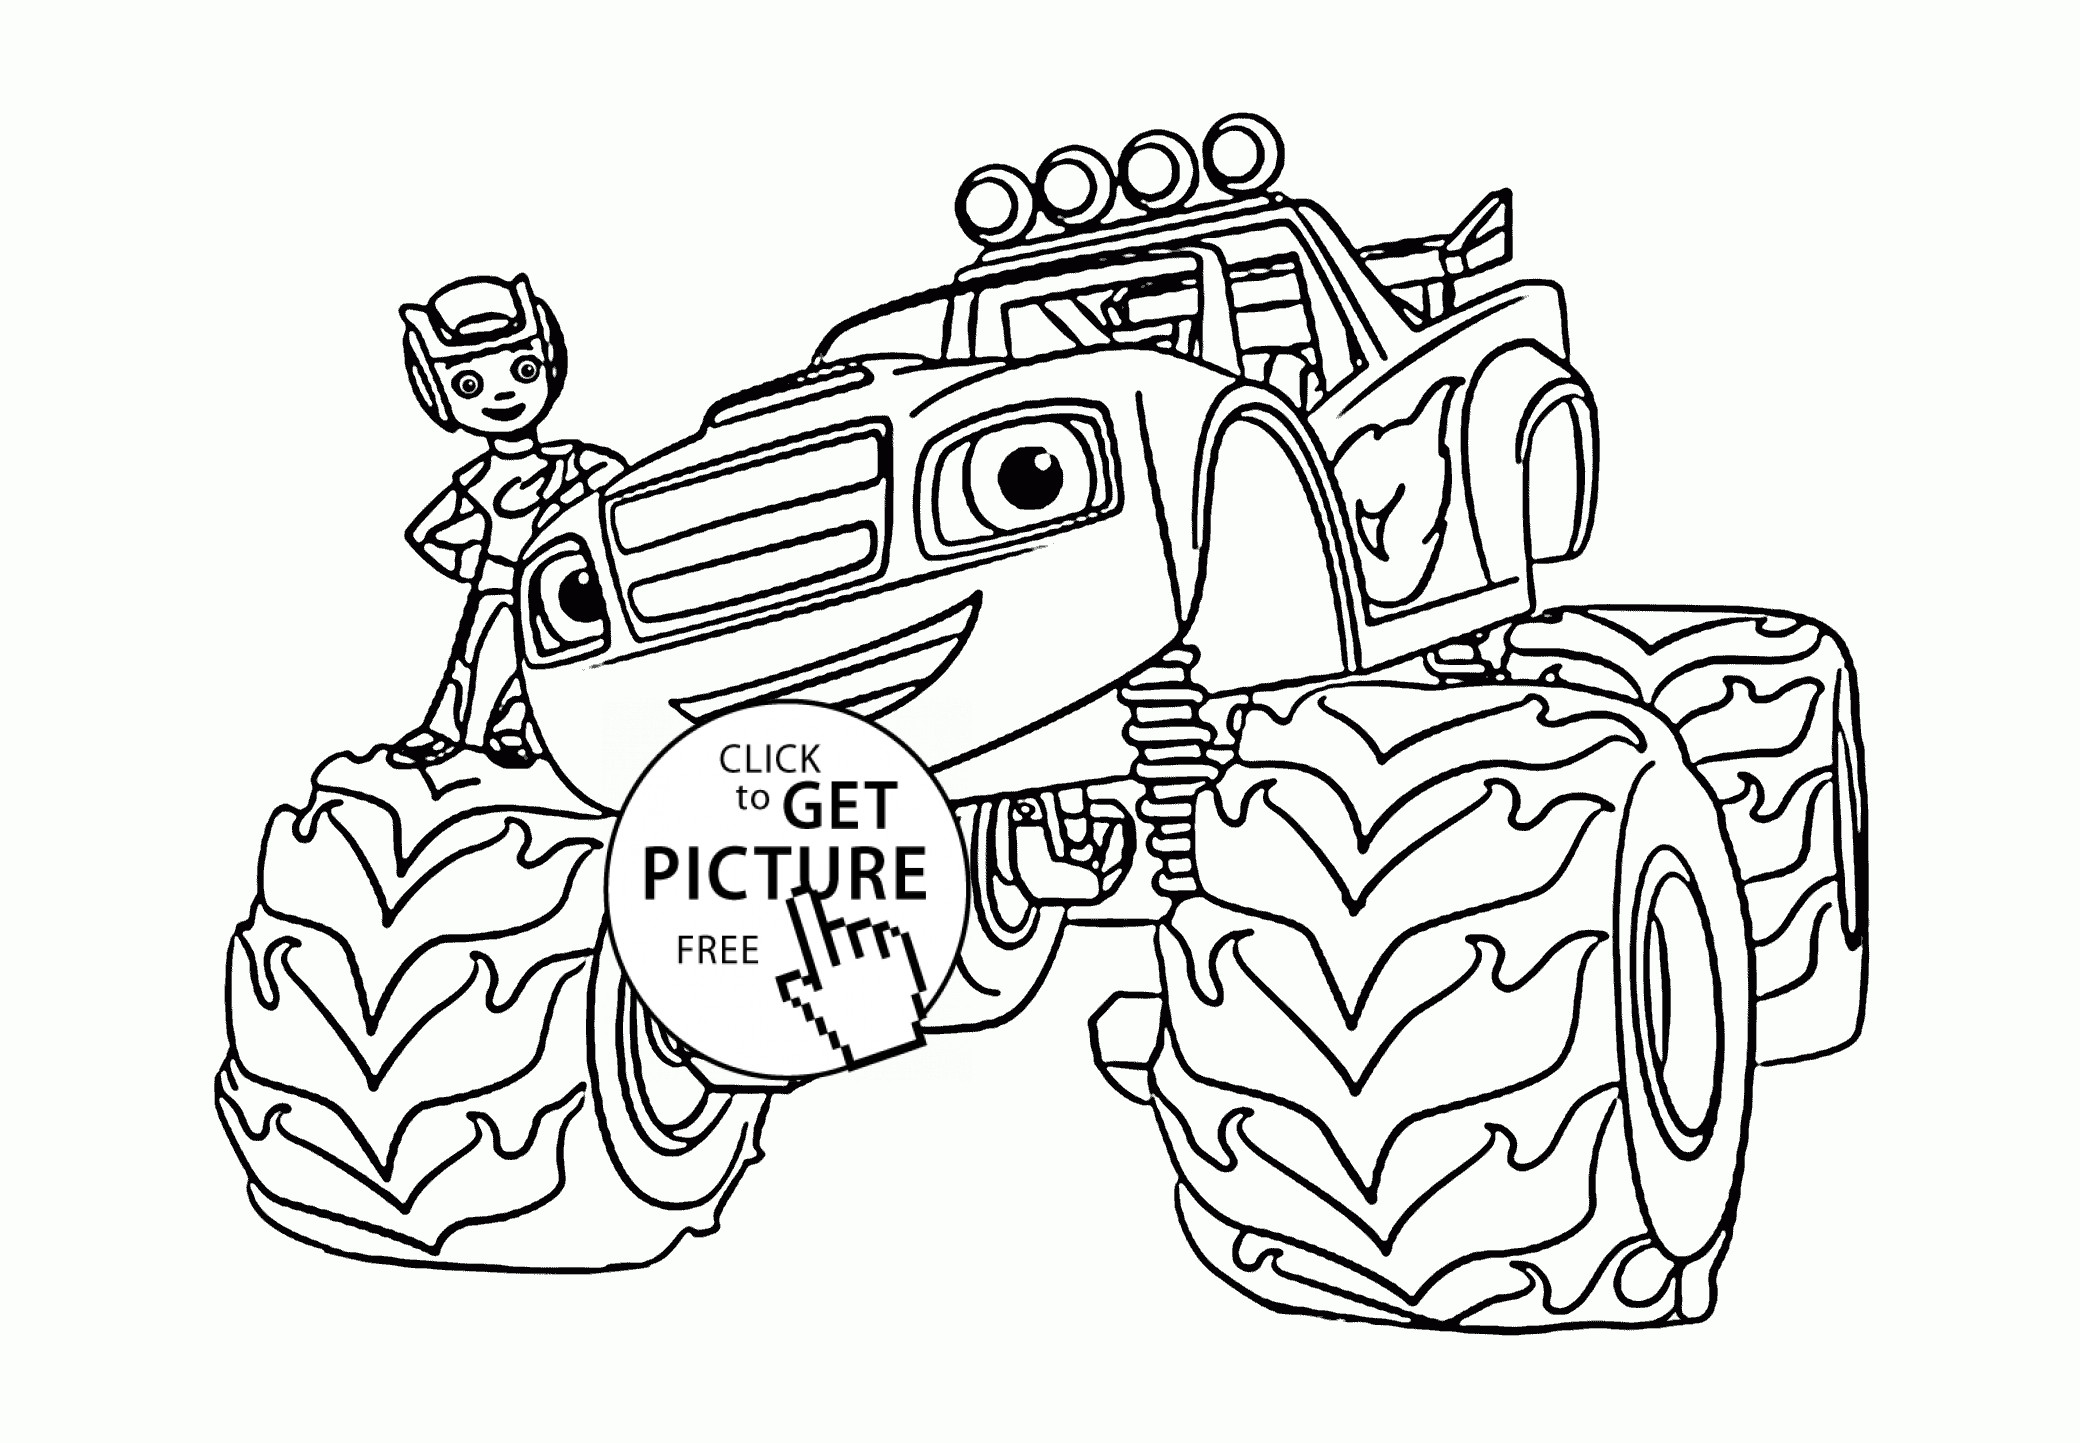 Blaze And The Monster Machines Printable Coloring Pages at